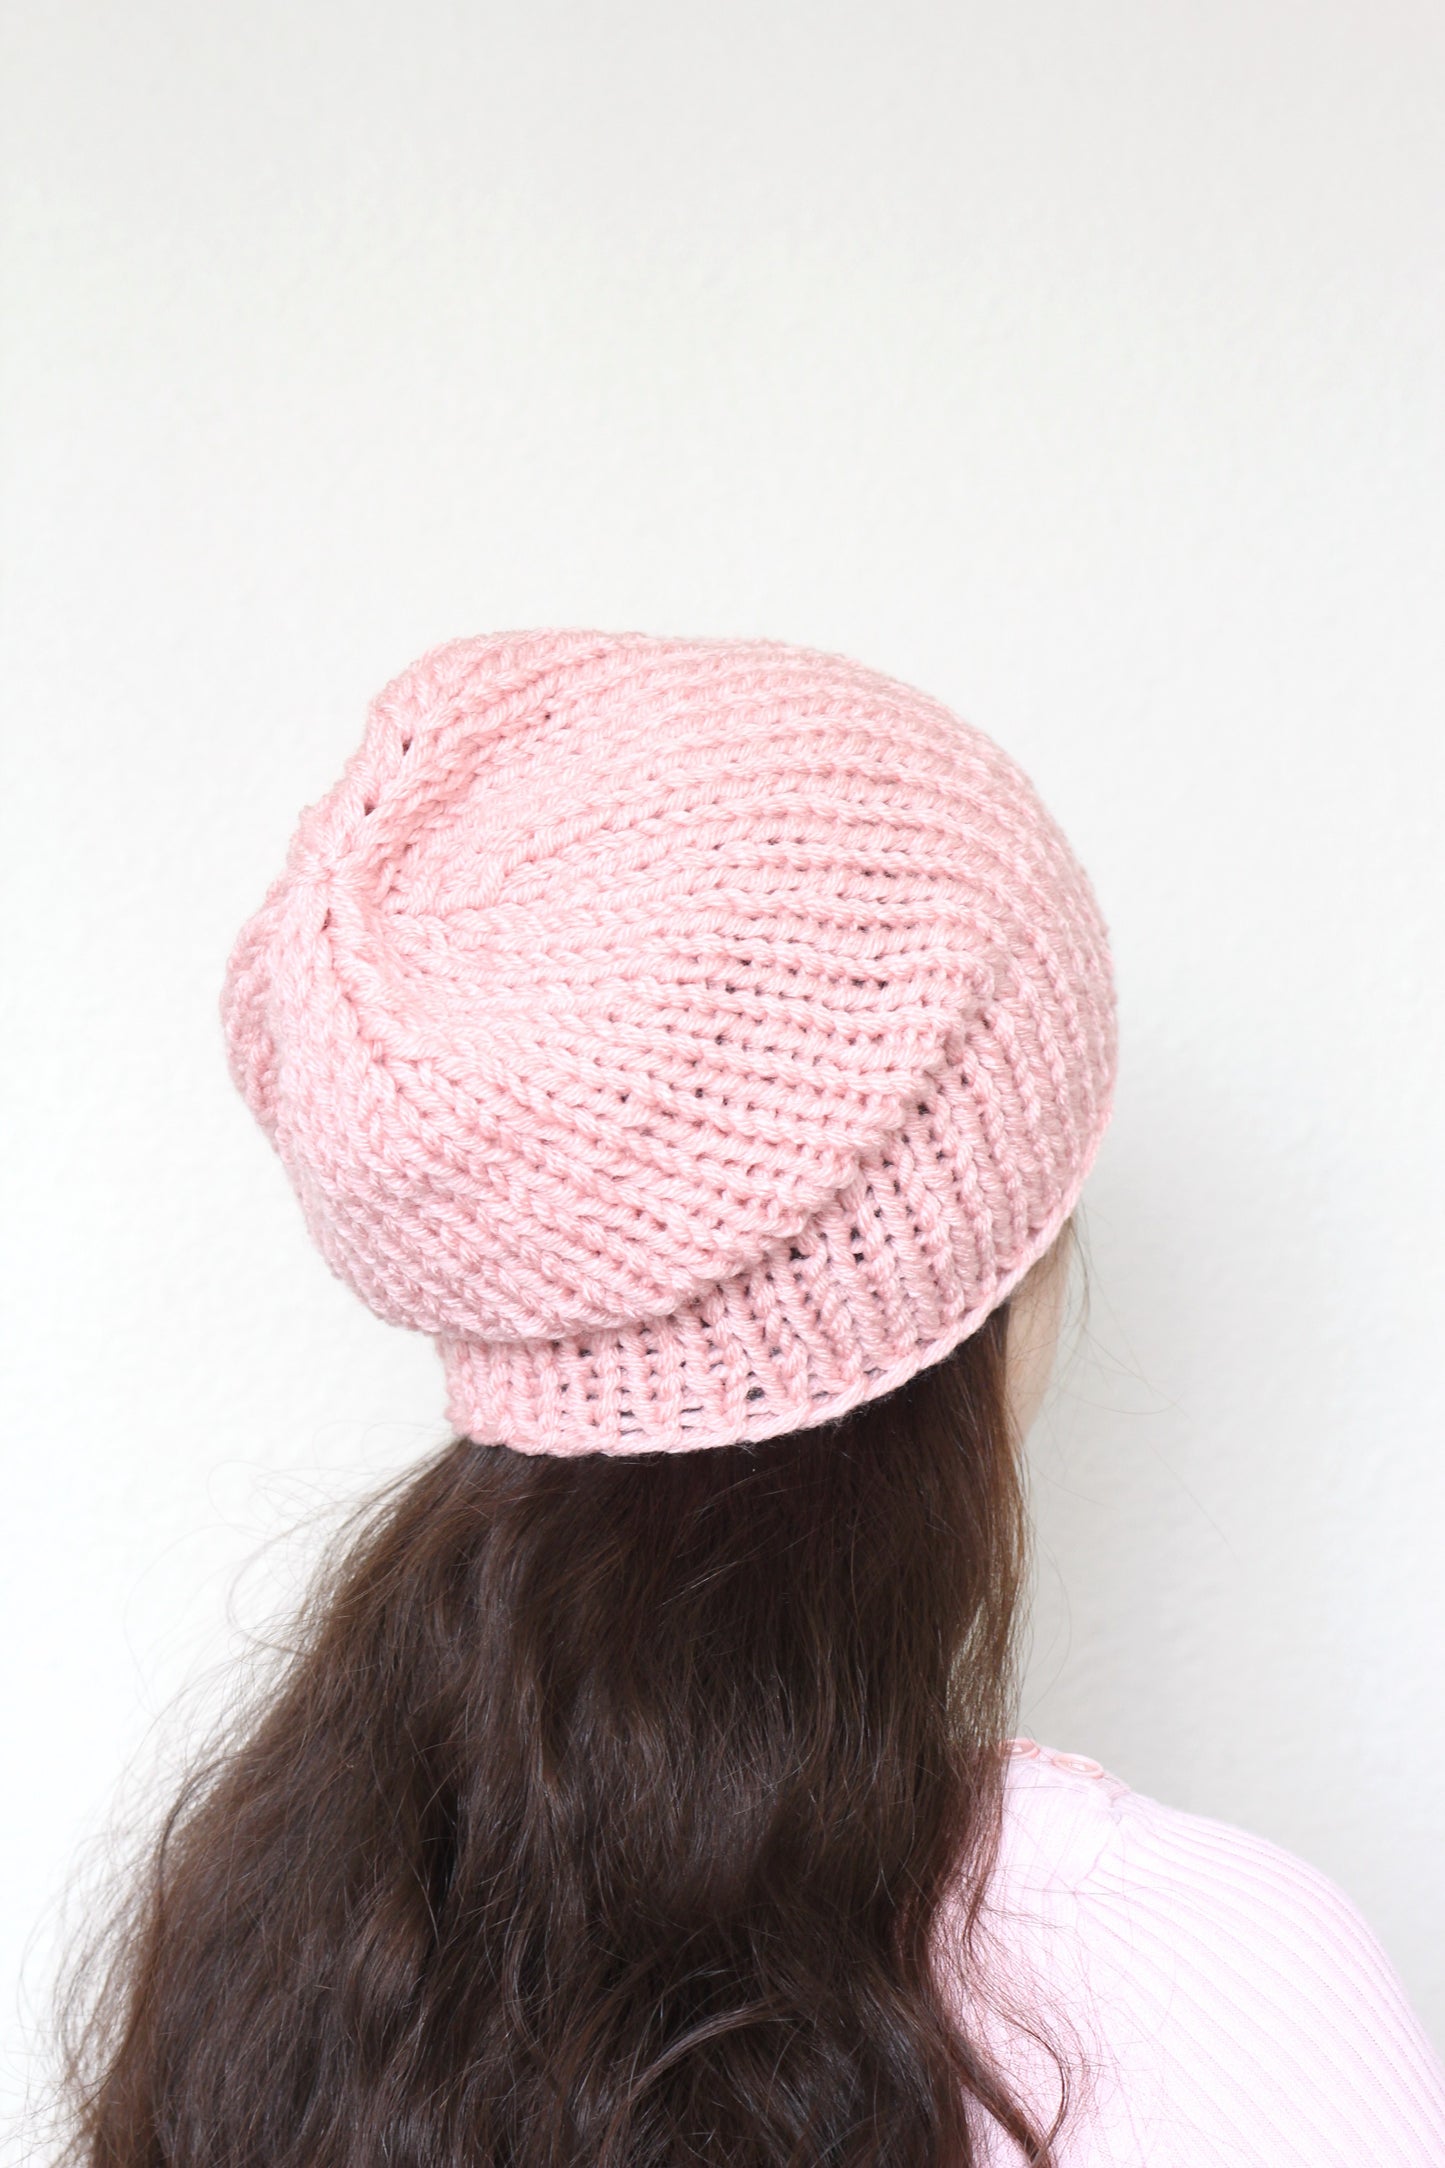 Beanie hat, knit hat, slouchy hat, knit beanie in rust orange color